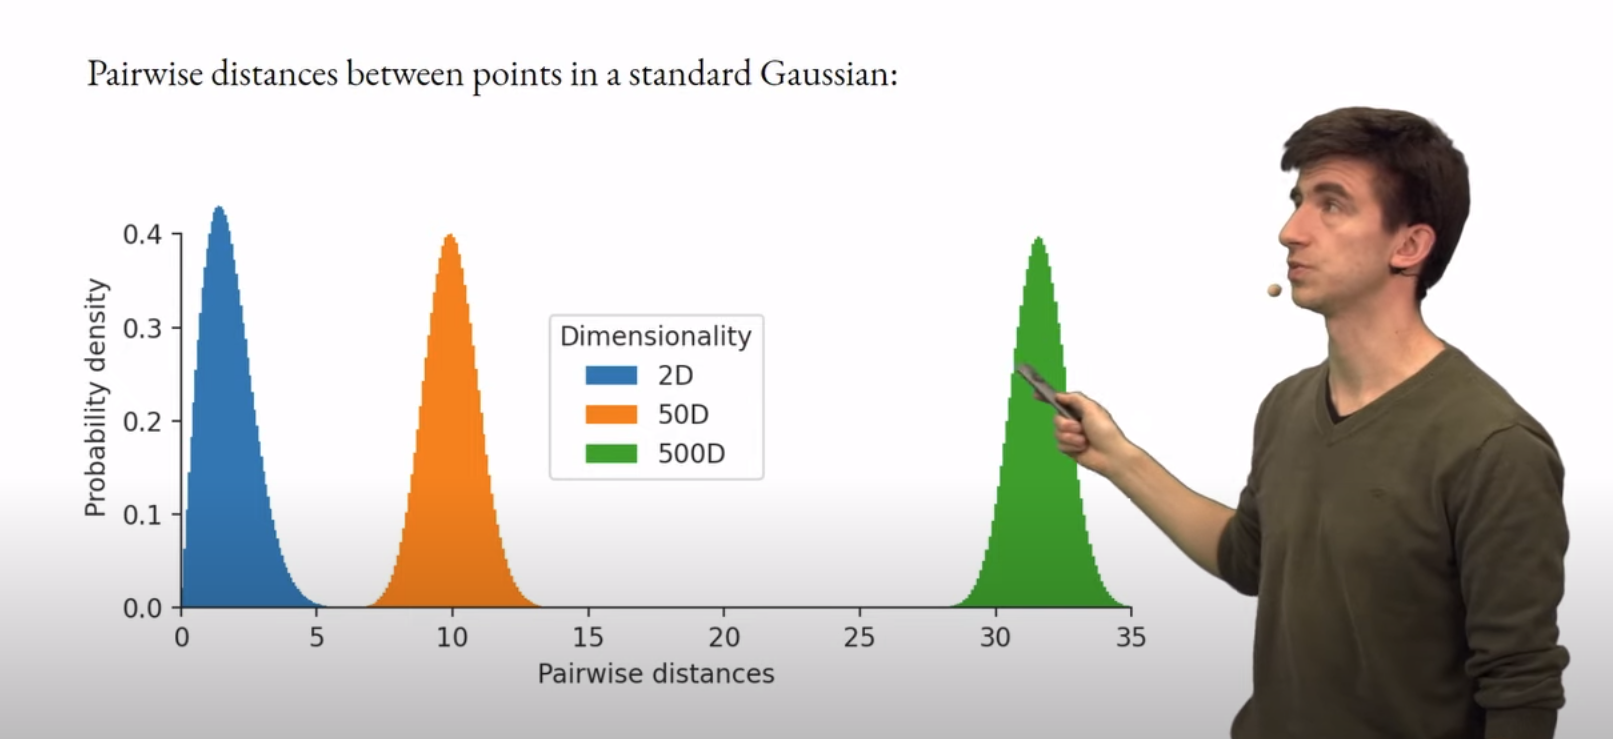 Pairwise Distances between points in a standard Gaussian